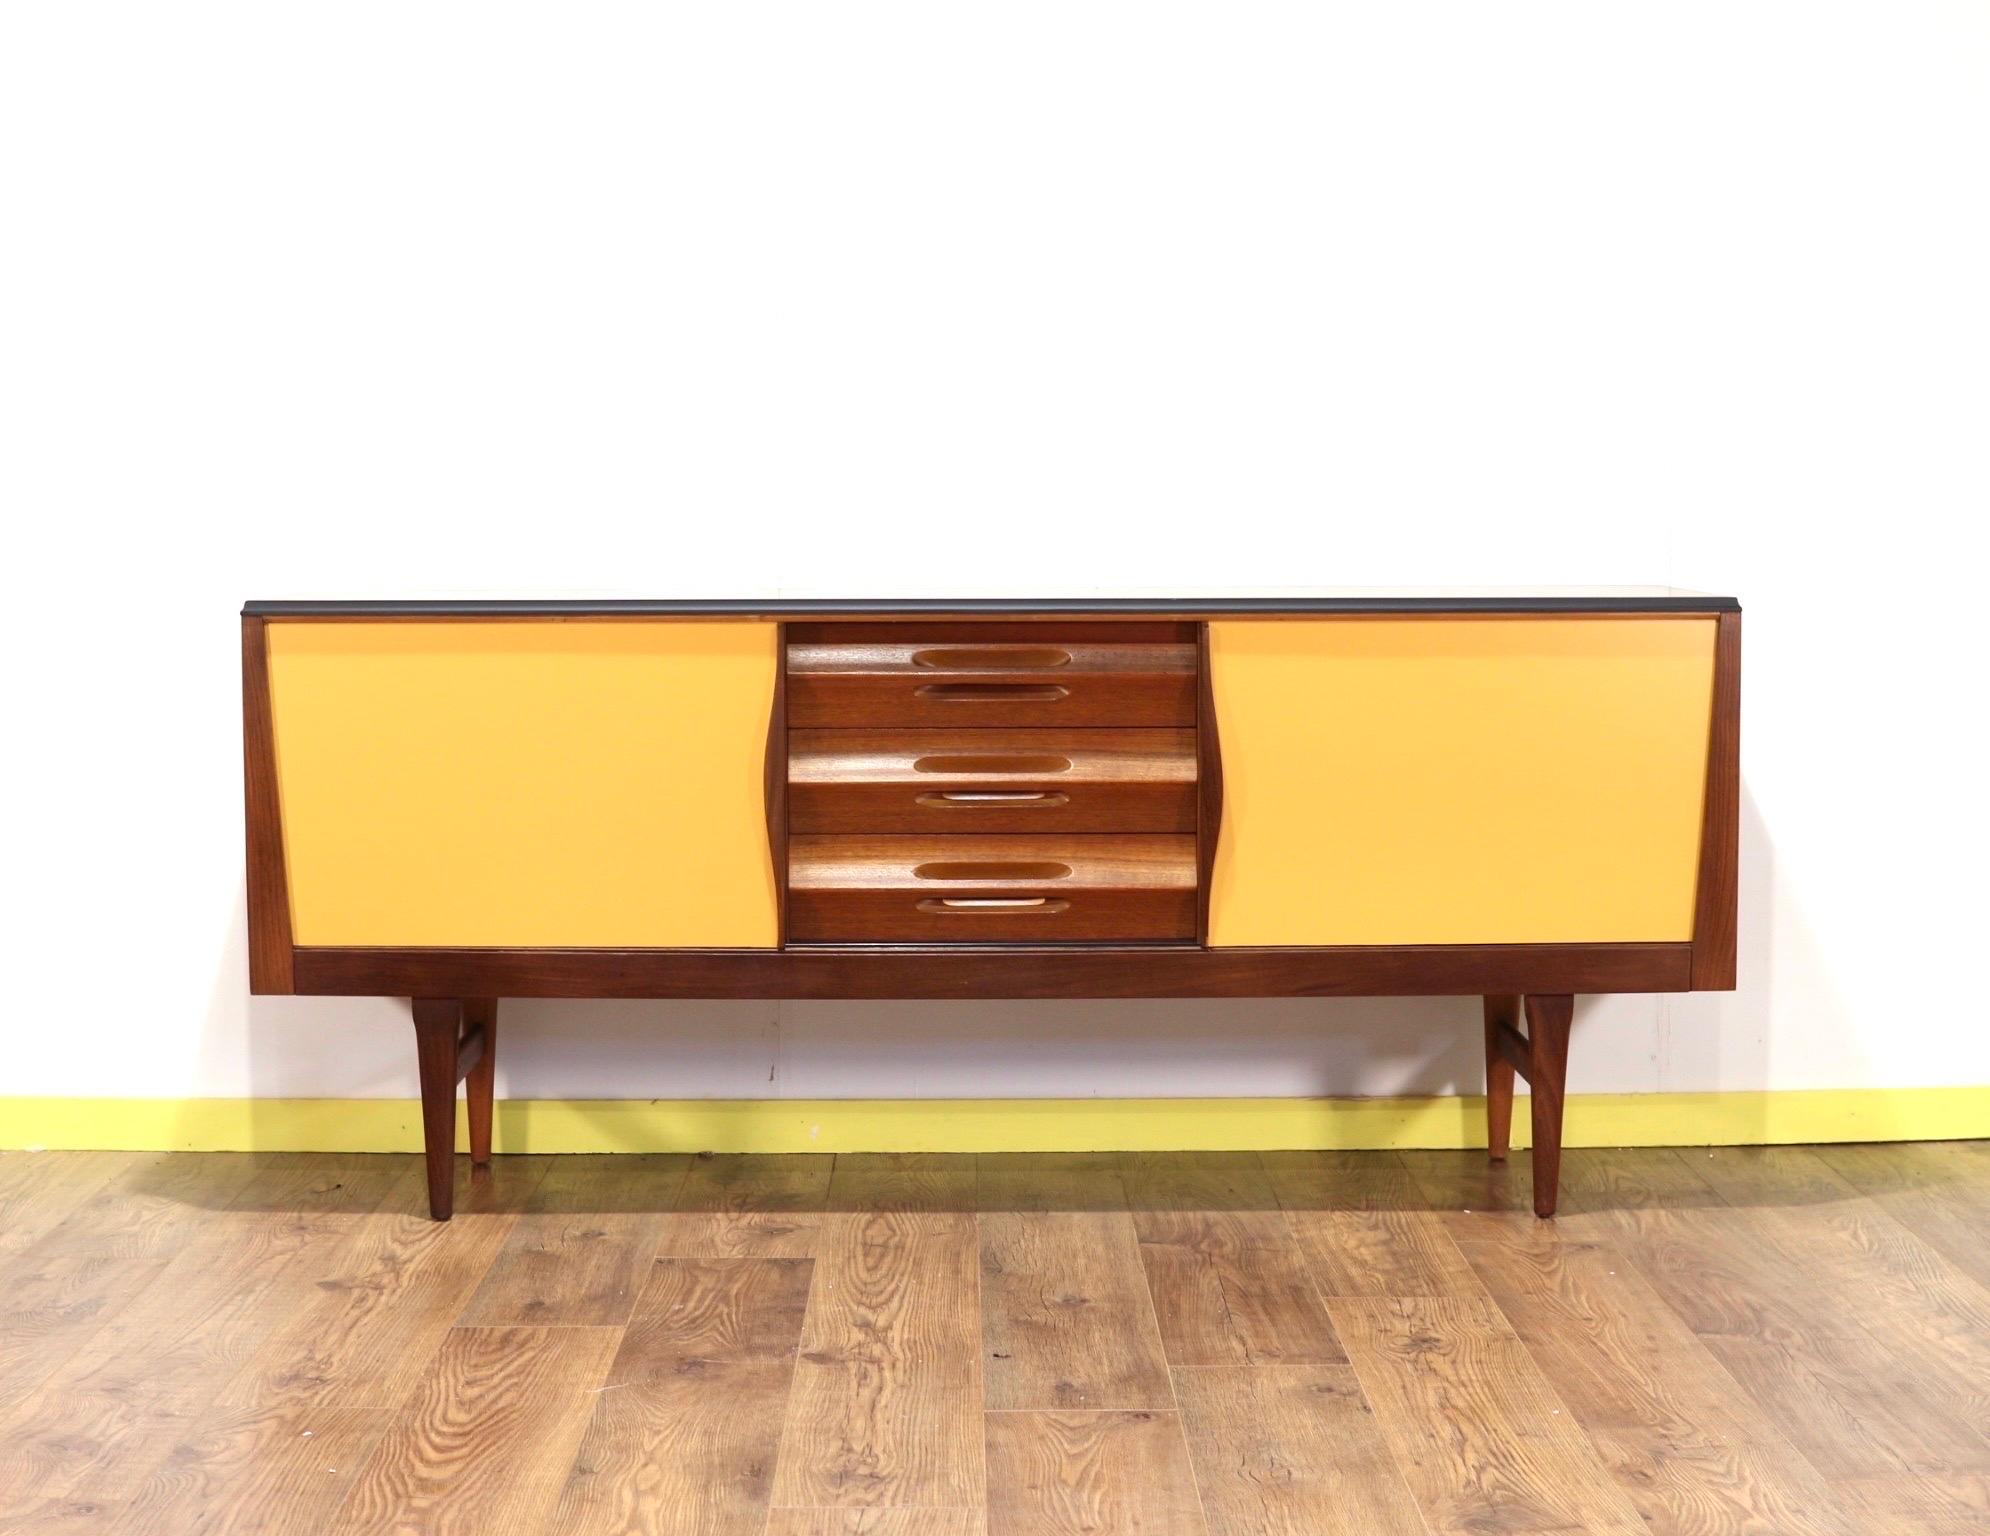 This unusal but beautiful credenza by British cabinet maker Elliots of Newbury is a stunning stand out piece that would look fabulous in and space. The yellow painted doors and black outer cabinet set this apart from the rest.